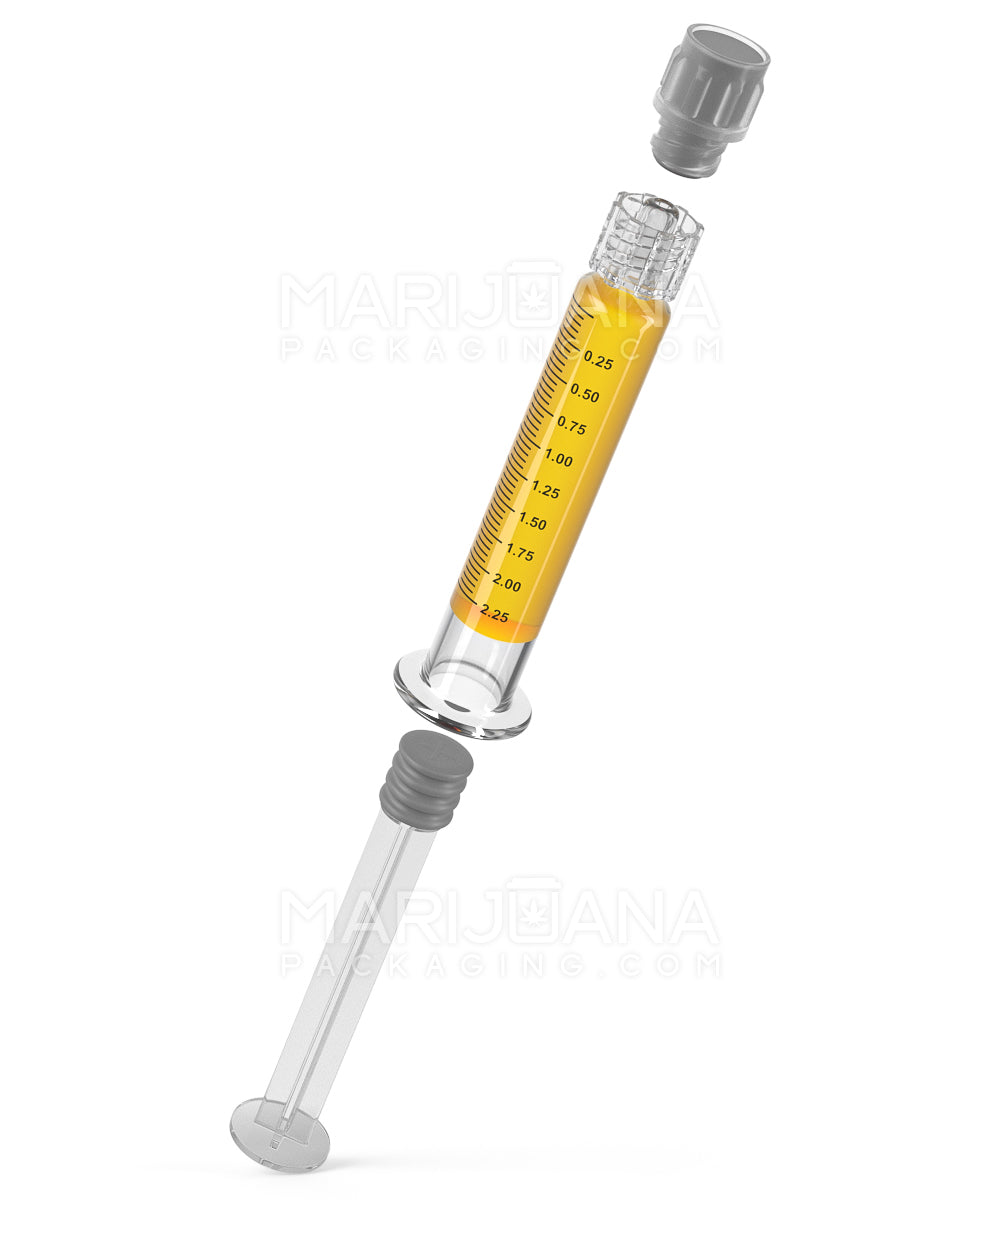 Luer Lock | Glass Dab Applicator Syringes | 2.25mL - 0.25mL Increments - 100 Count - 7